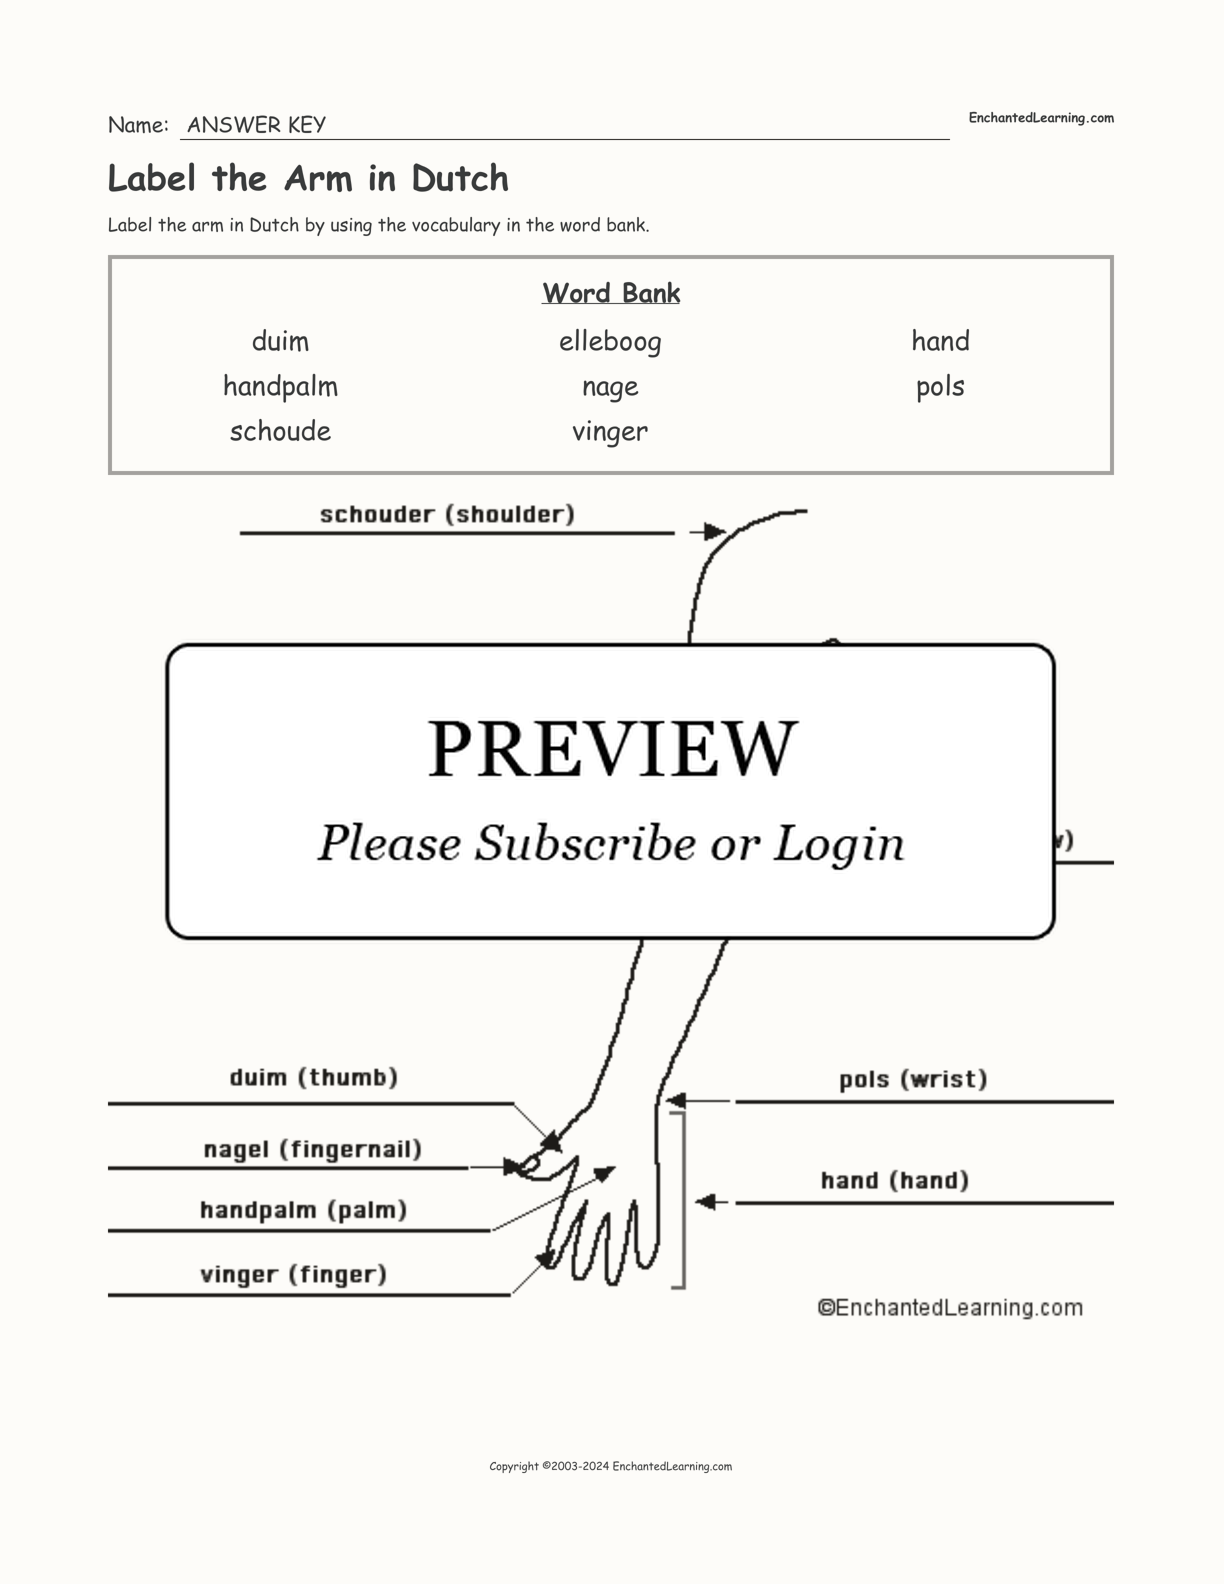 Label the Arm in Dutch interactive worksheet page 2